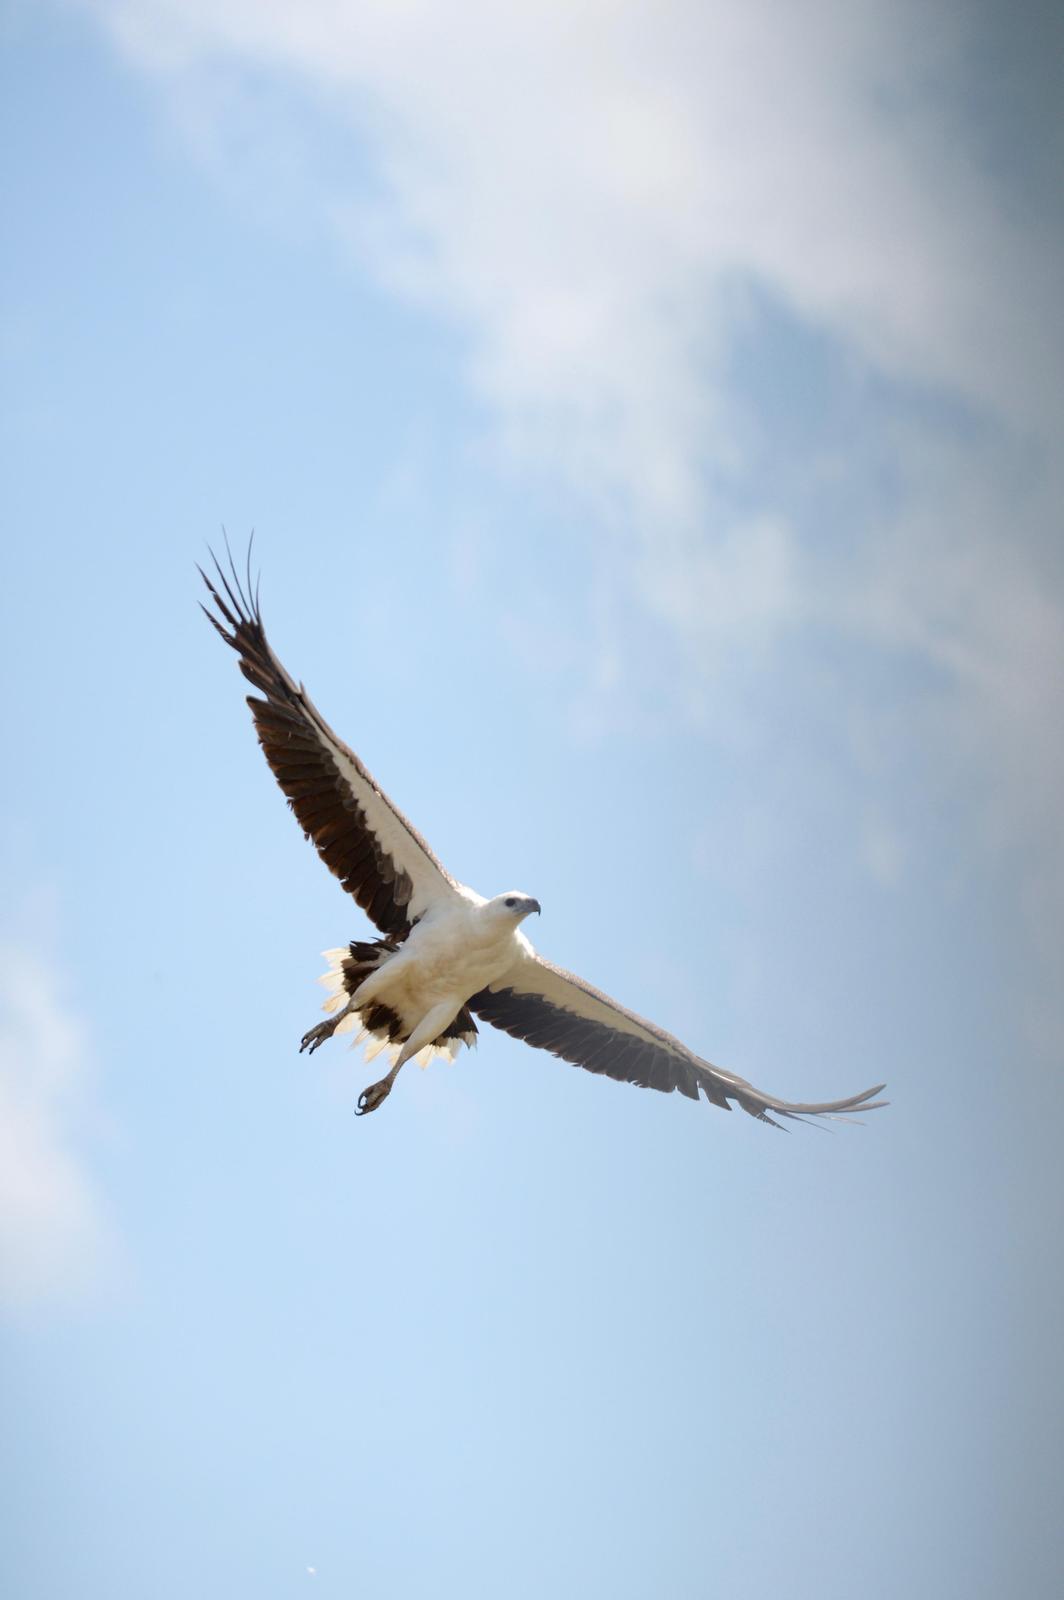 White-bellied Sea-Eagle Photo by marcel finlay